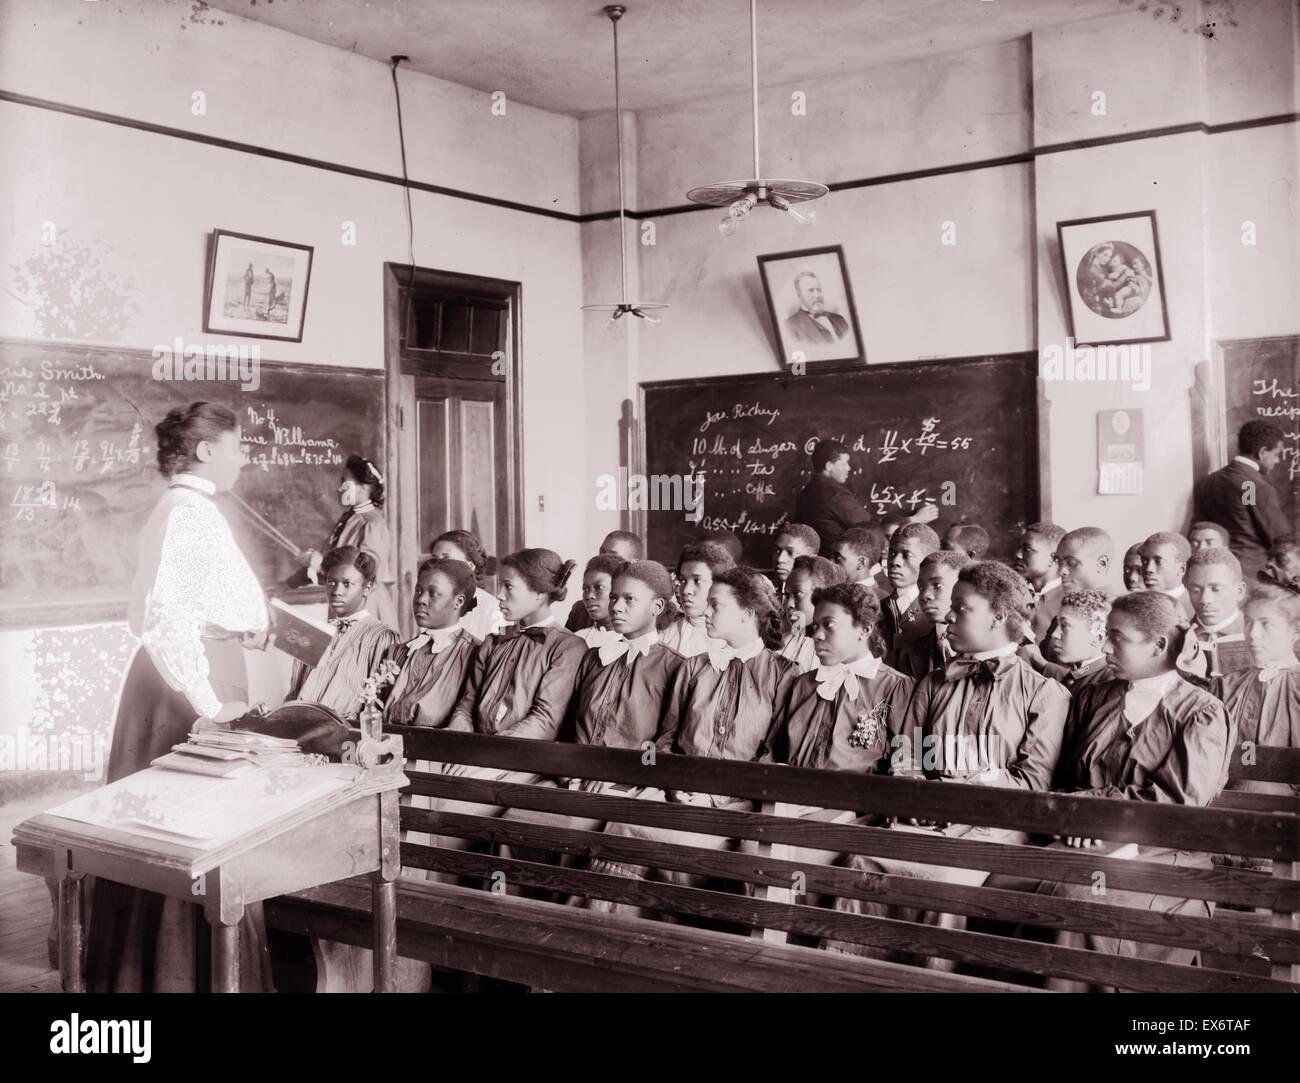 Photograph of a Mathematics class at Tuskegee Institute. Photographed by Frances Benjamin Johnston (1864-1952) an American female photographer and photojournalist. Dated 1906 Stock Photo